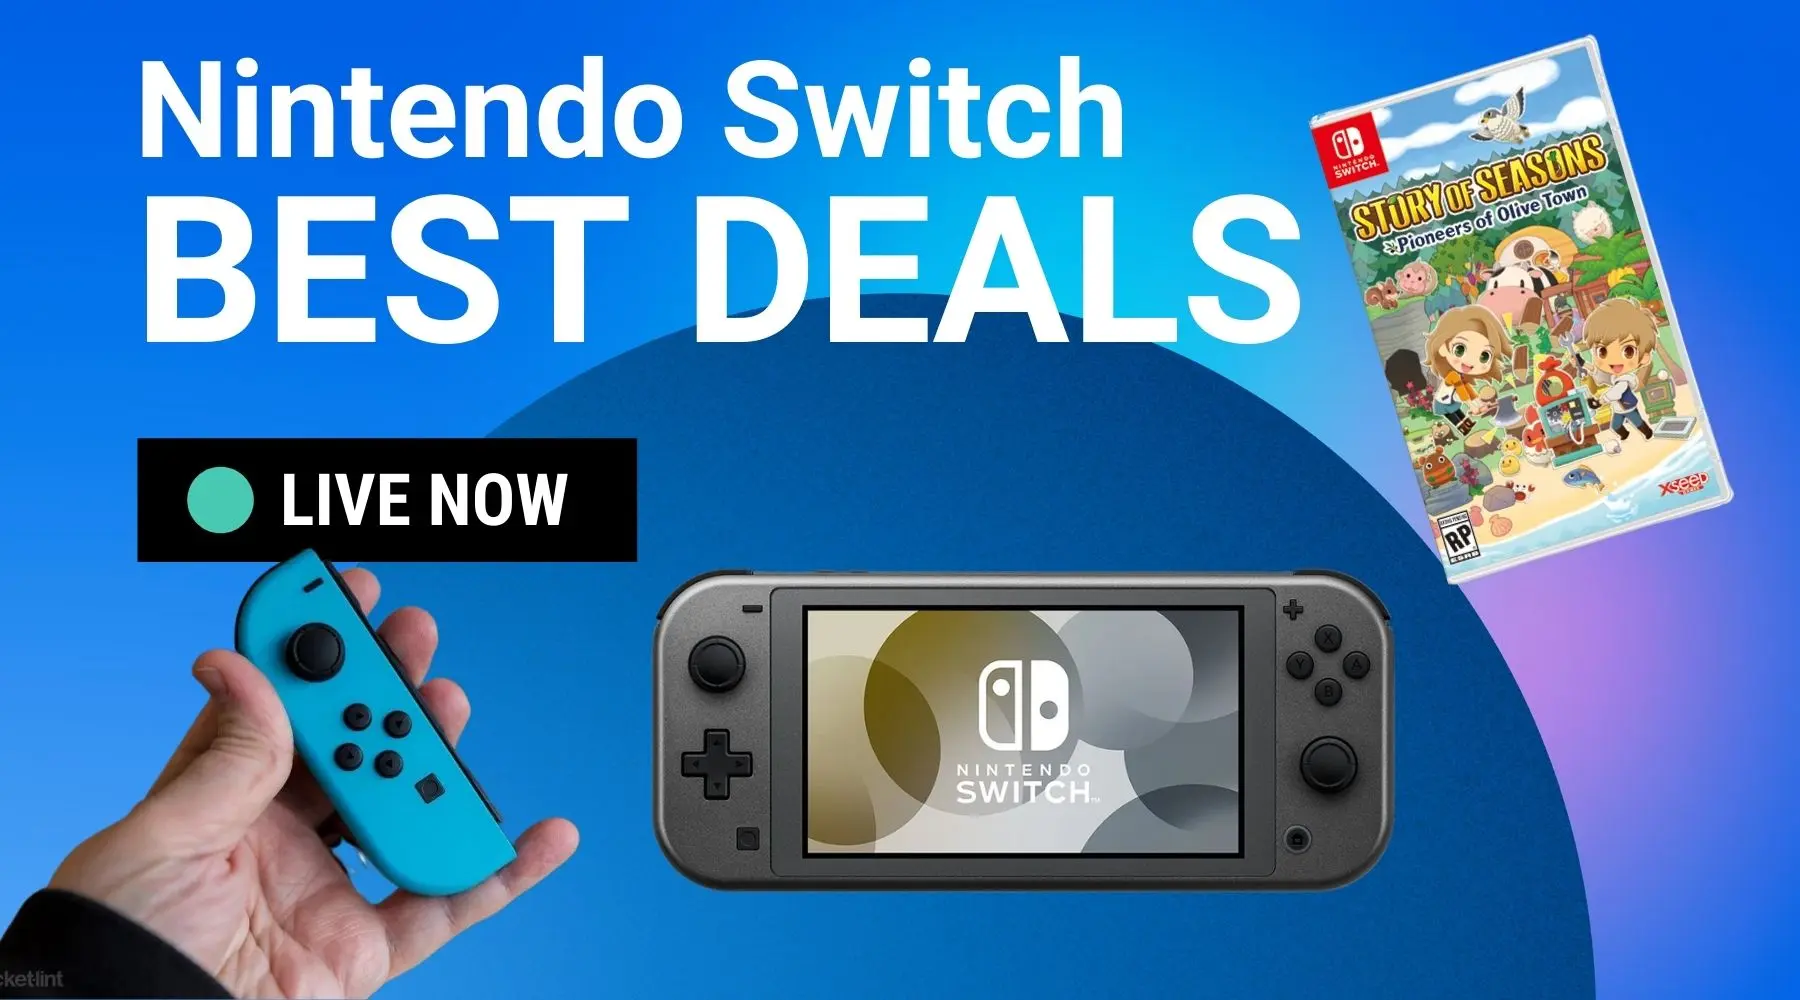 Get Nintendo Switch games up to 50% off ahead of Black Friday